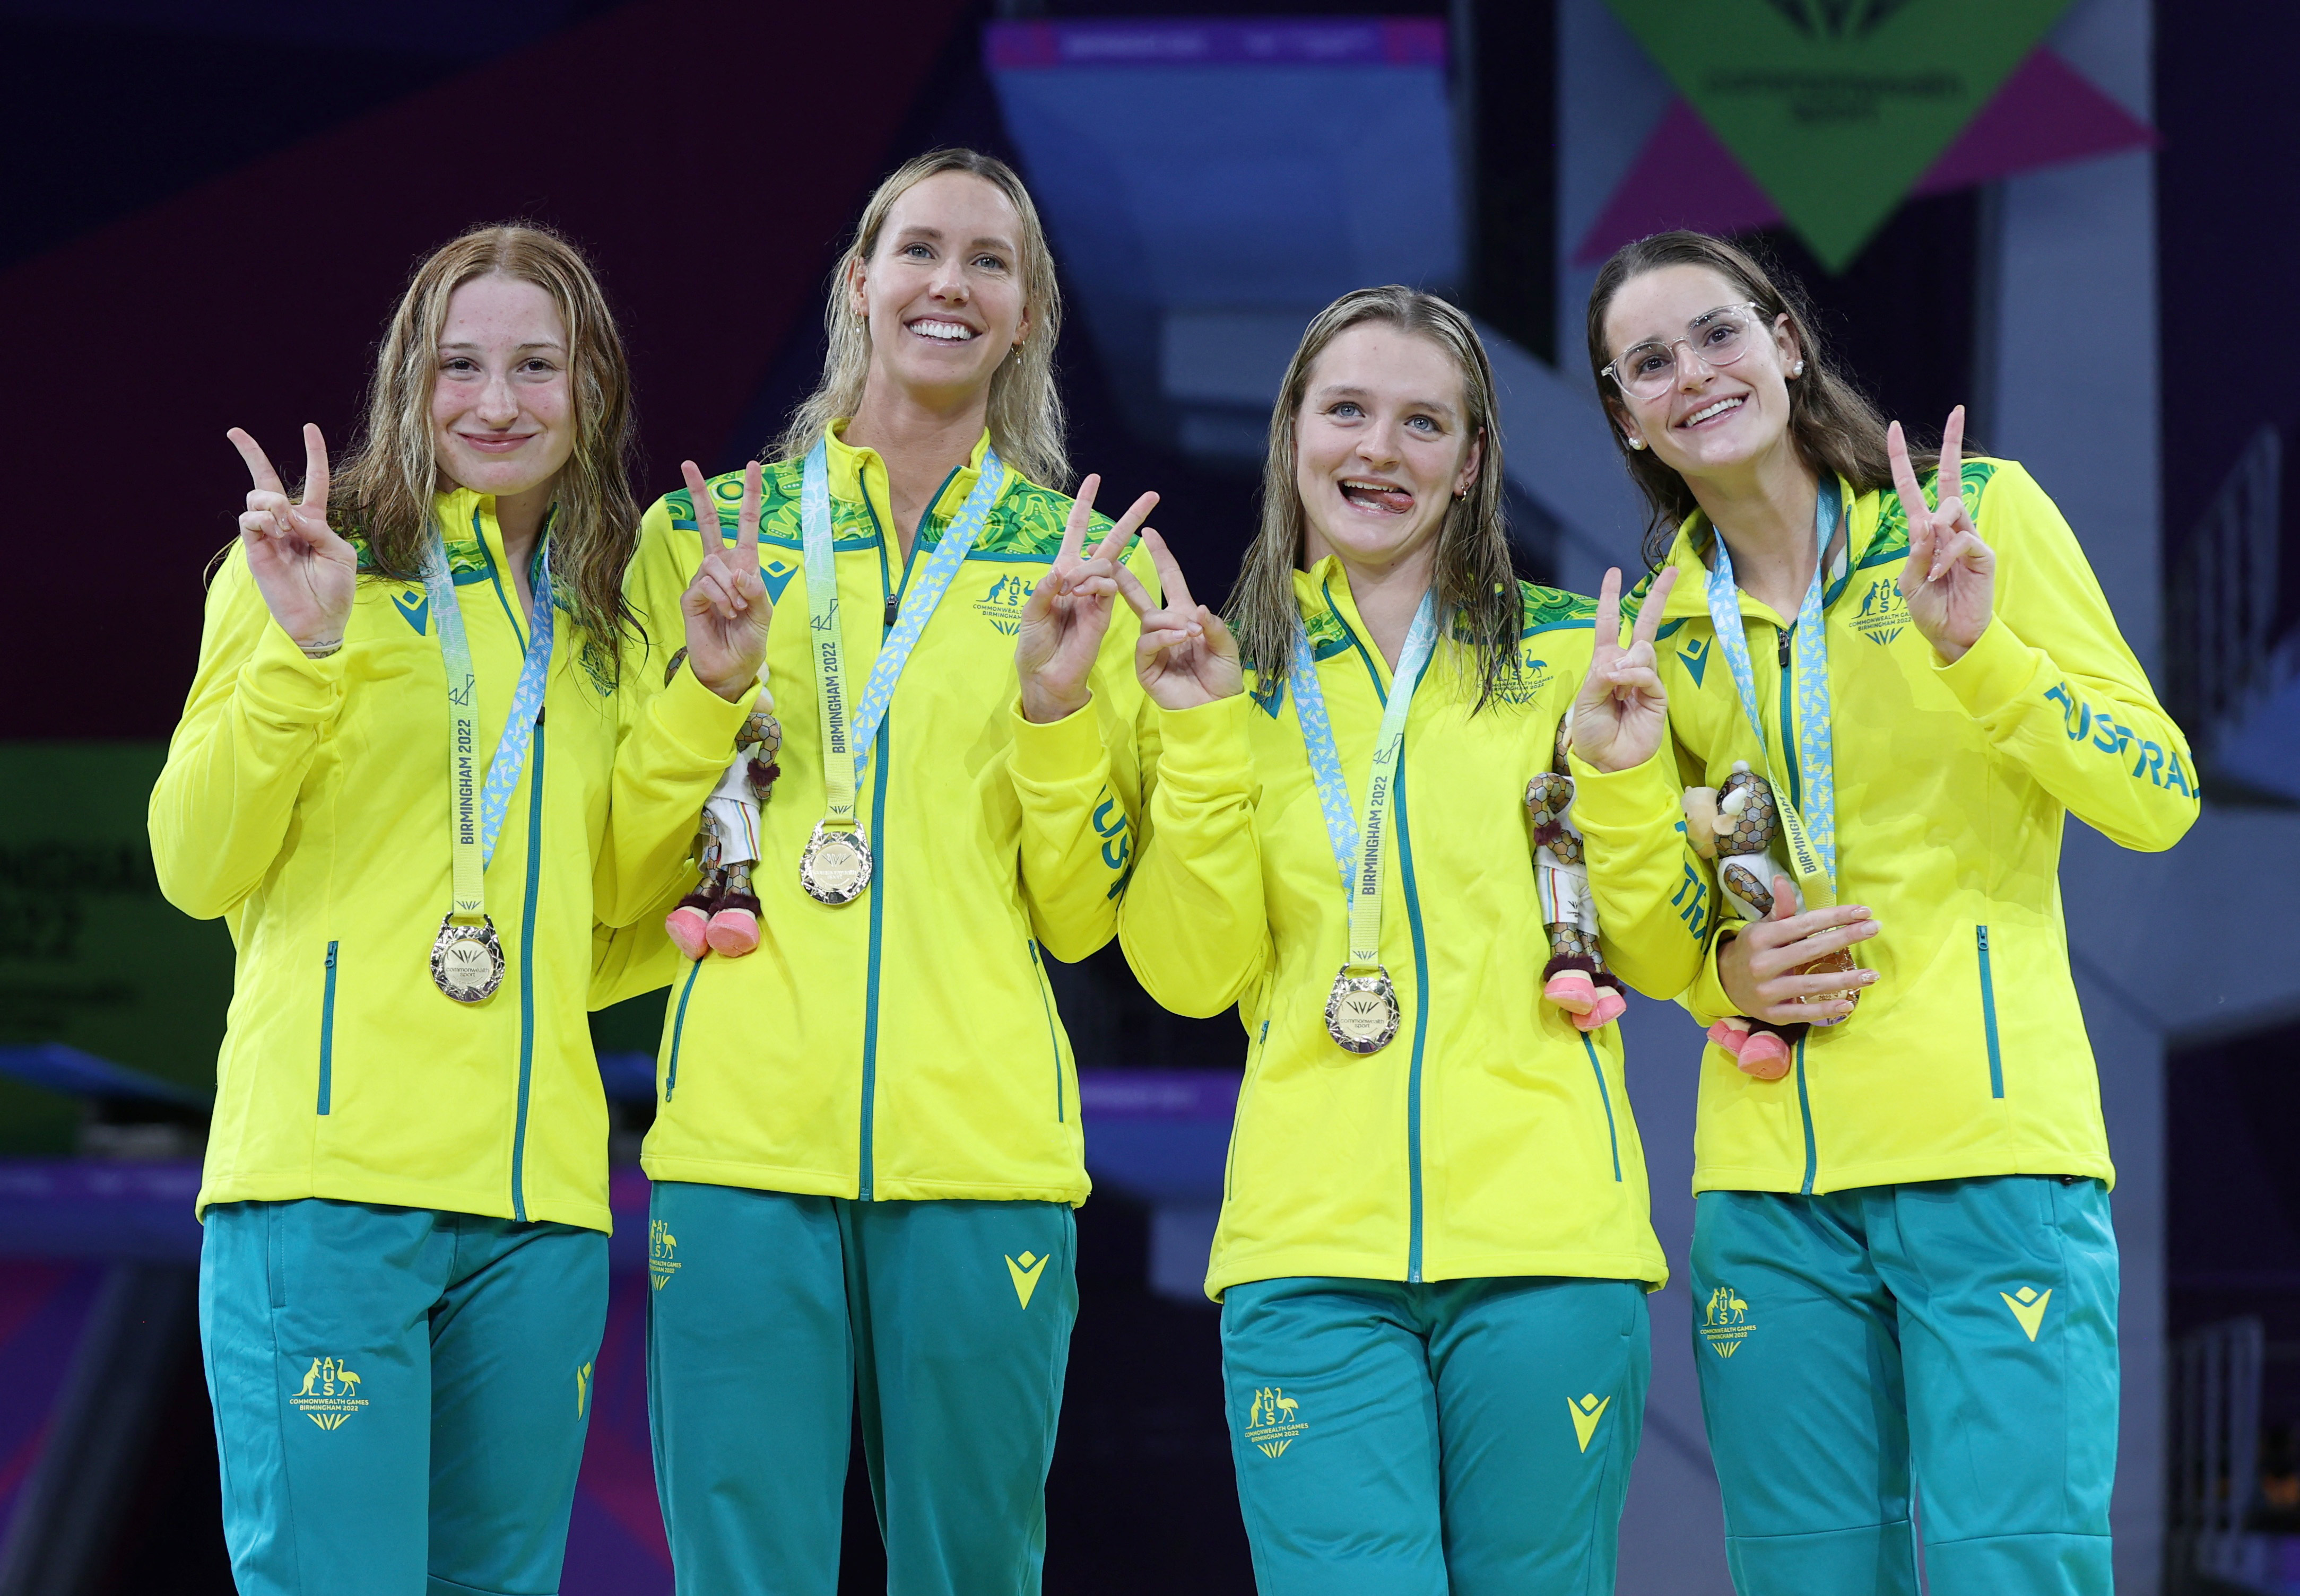 Commonwealth Games - Swimming - Women's 4 x 100m Medley Relay - Medal Ceremony - Sandwell Aquatics Centre, Birmingham, Britain - August 3, 2022 Gold Medallists Australia's Mollie O'Callaghan, Emma McKeon, Chelsea Hodges and Kaylee McKeown celebrate on the podium during the medal ceremony REUTERS/Stoyan Nenov